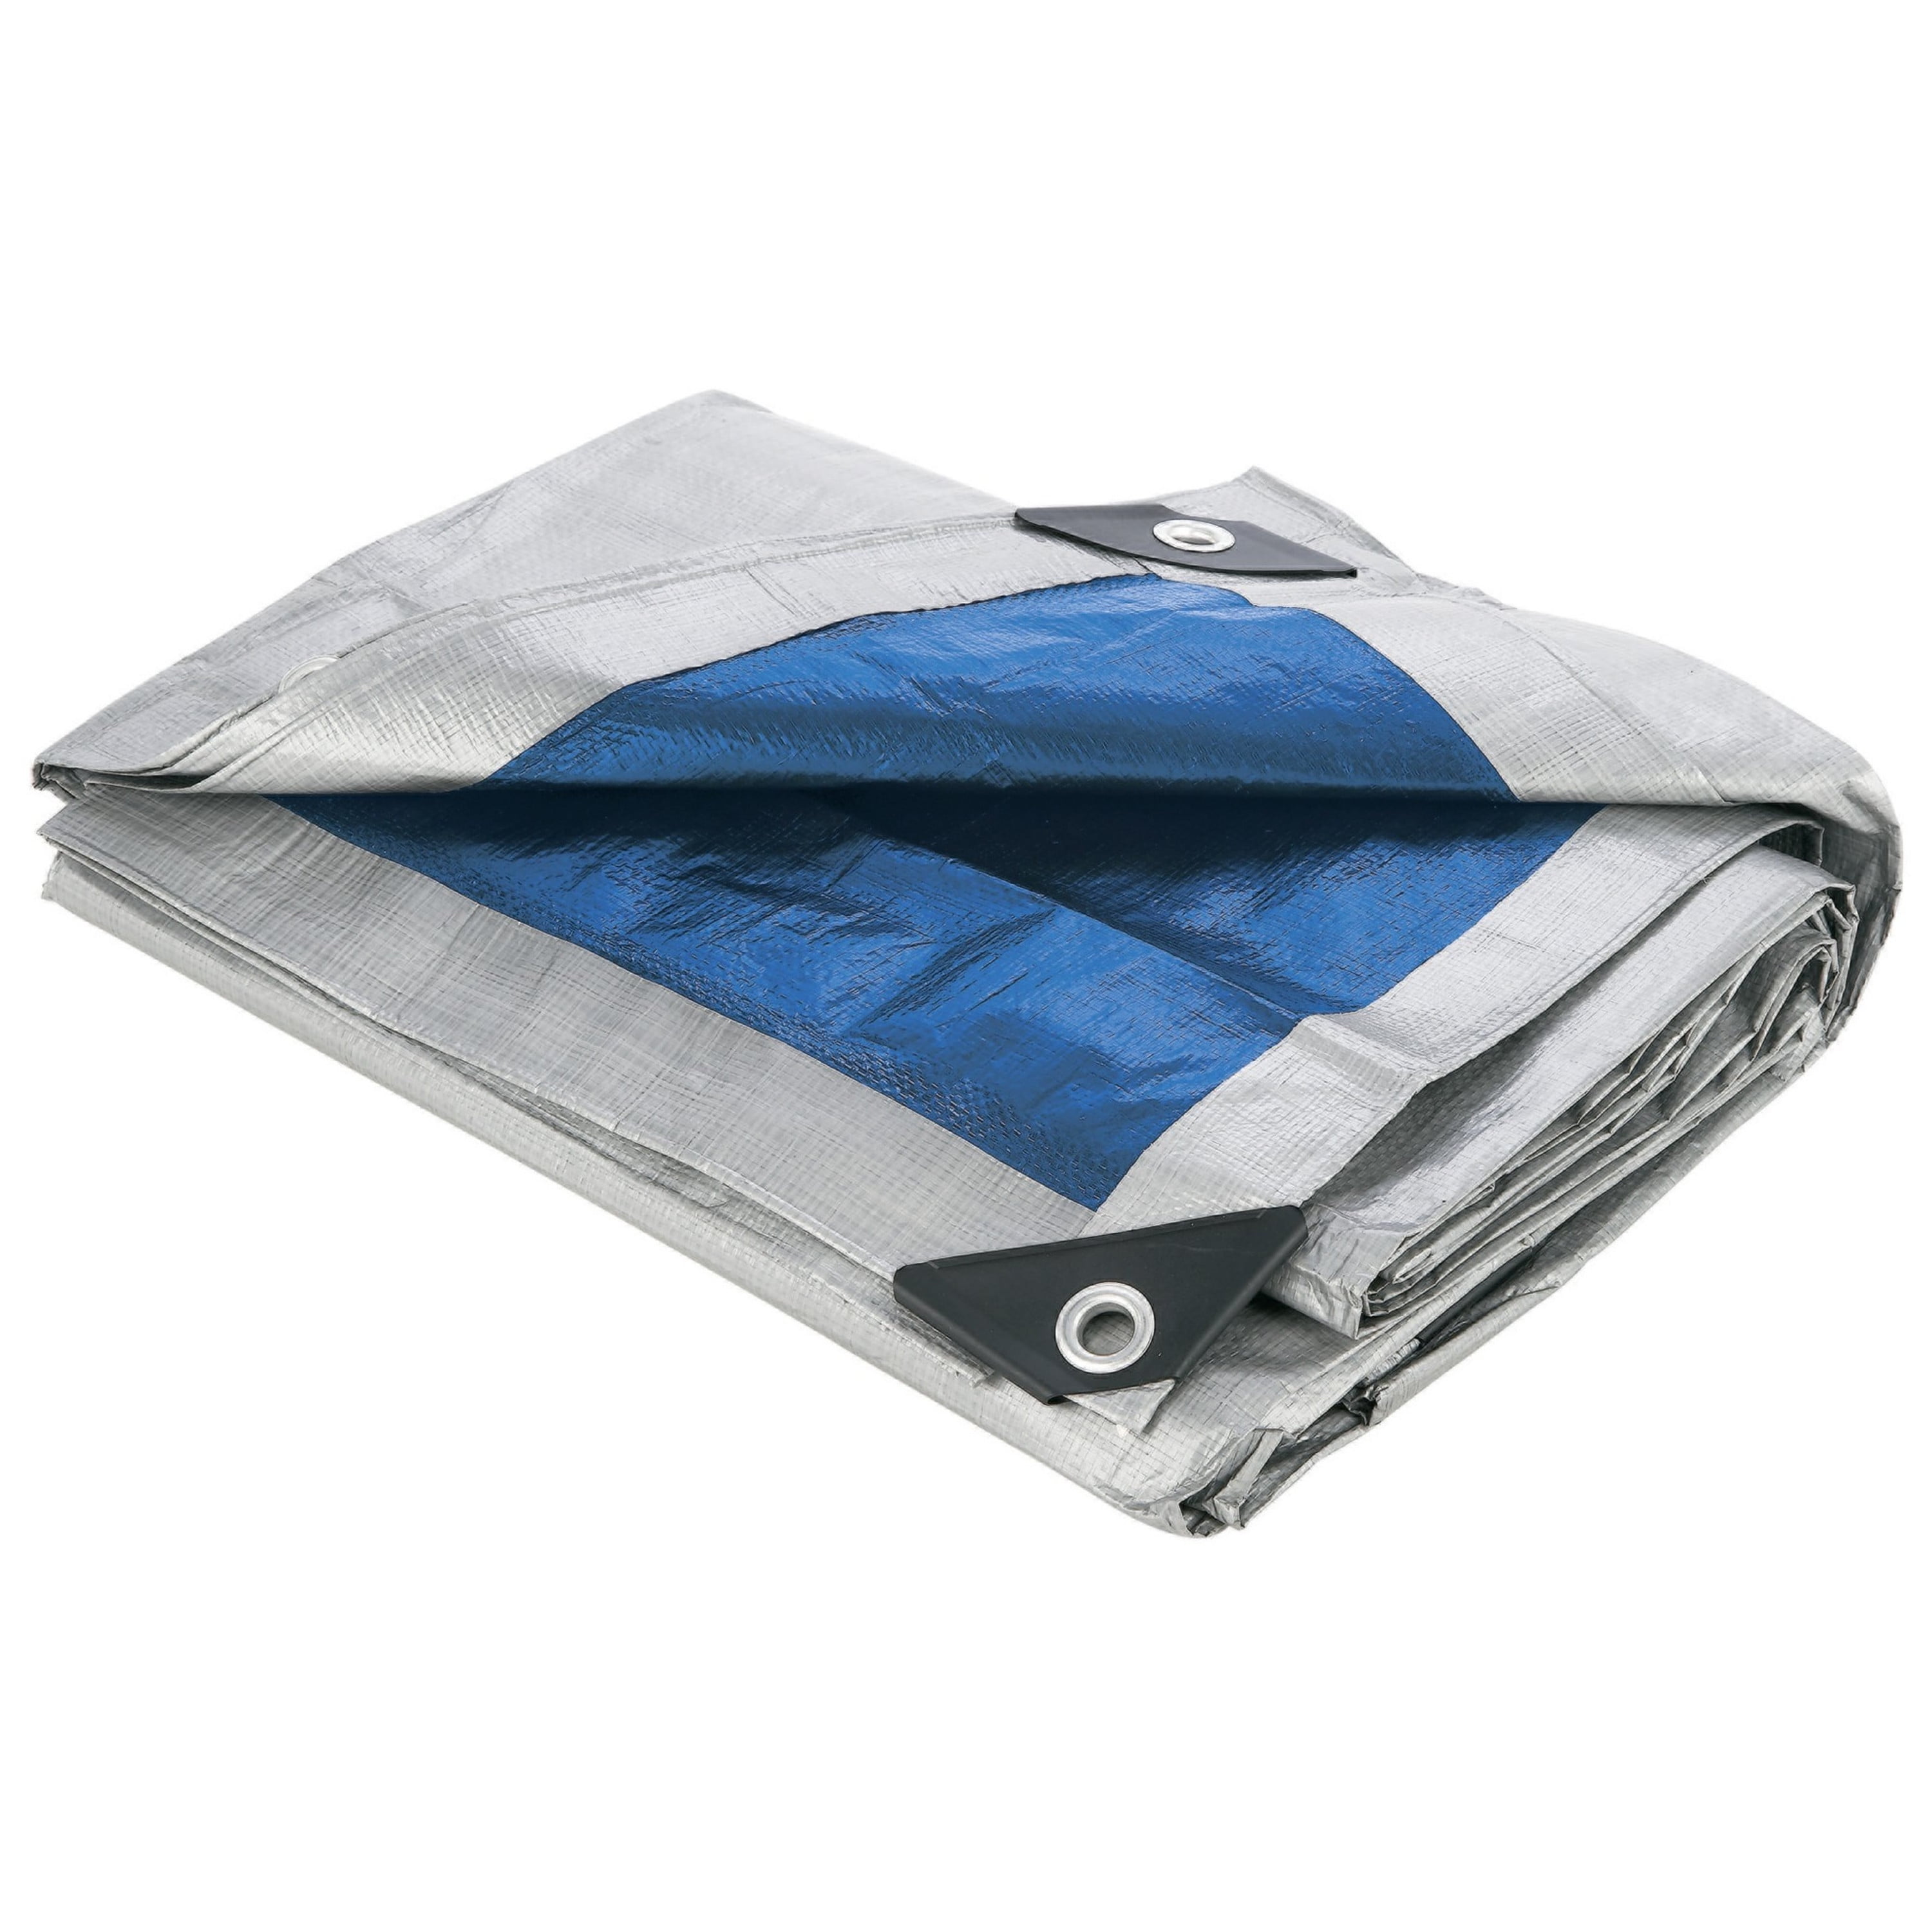 easy to handl extension tape included all-in-one basic tarp DOD One day tarp 